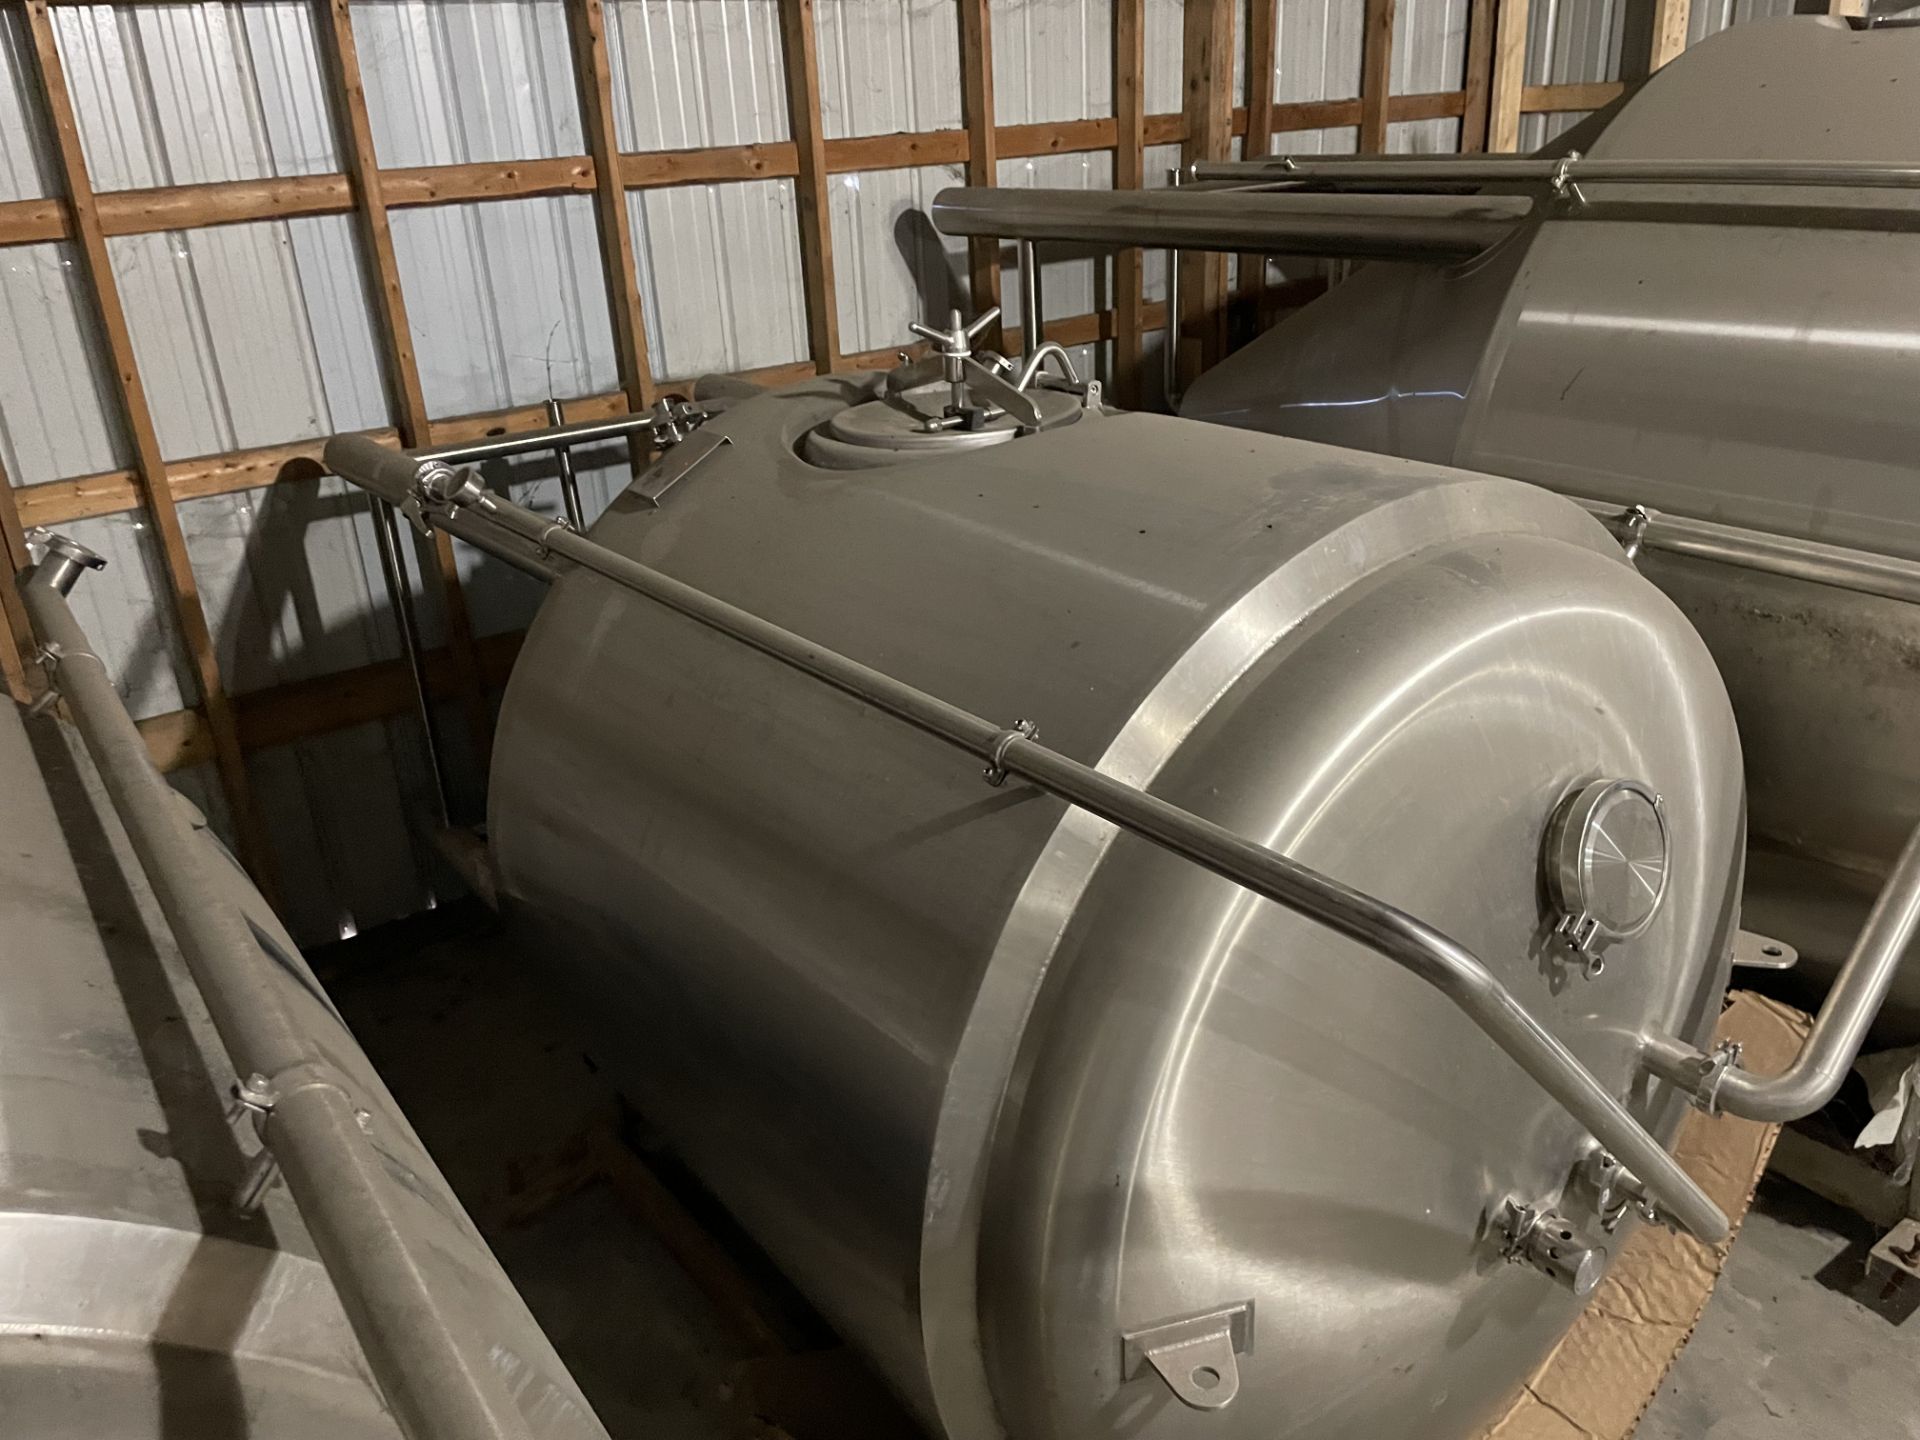 Consignment Item - located in Breese, IL: NEVER USED, Kent 20 bbl Beer Fermenter, from 2014